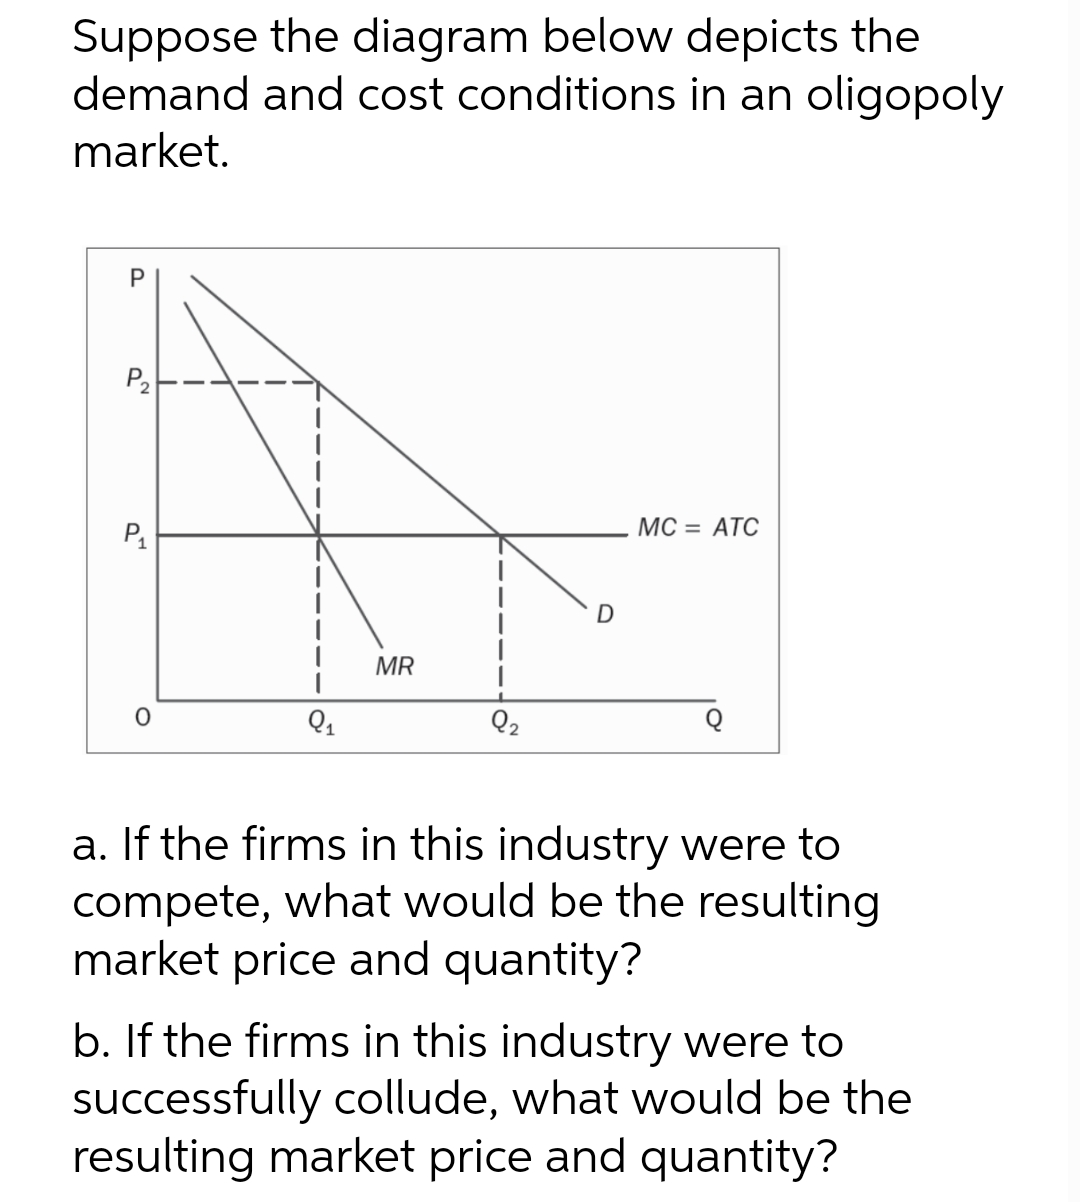 Suppose the diagram below depicts the
demand and cost conditions in an oligopoly
market.
P₂
P₁
0
91
MR
Q2
D
MC = ATC
a. If the firms in this industry were to
compete, what would be the resulting
market price and quantity?
b. If the firms in this industry were to
successfully collude, what would be the
resulting market price and quantity?